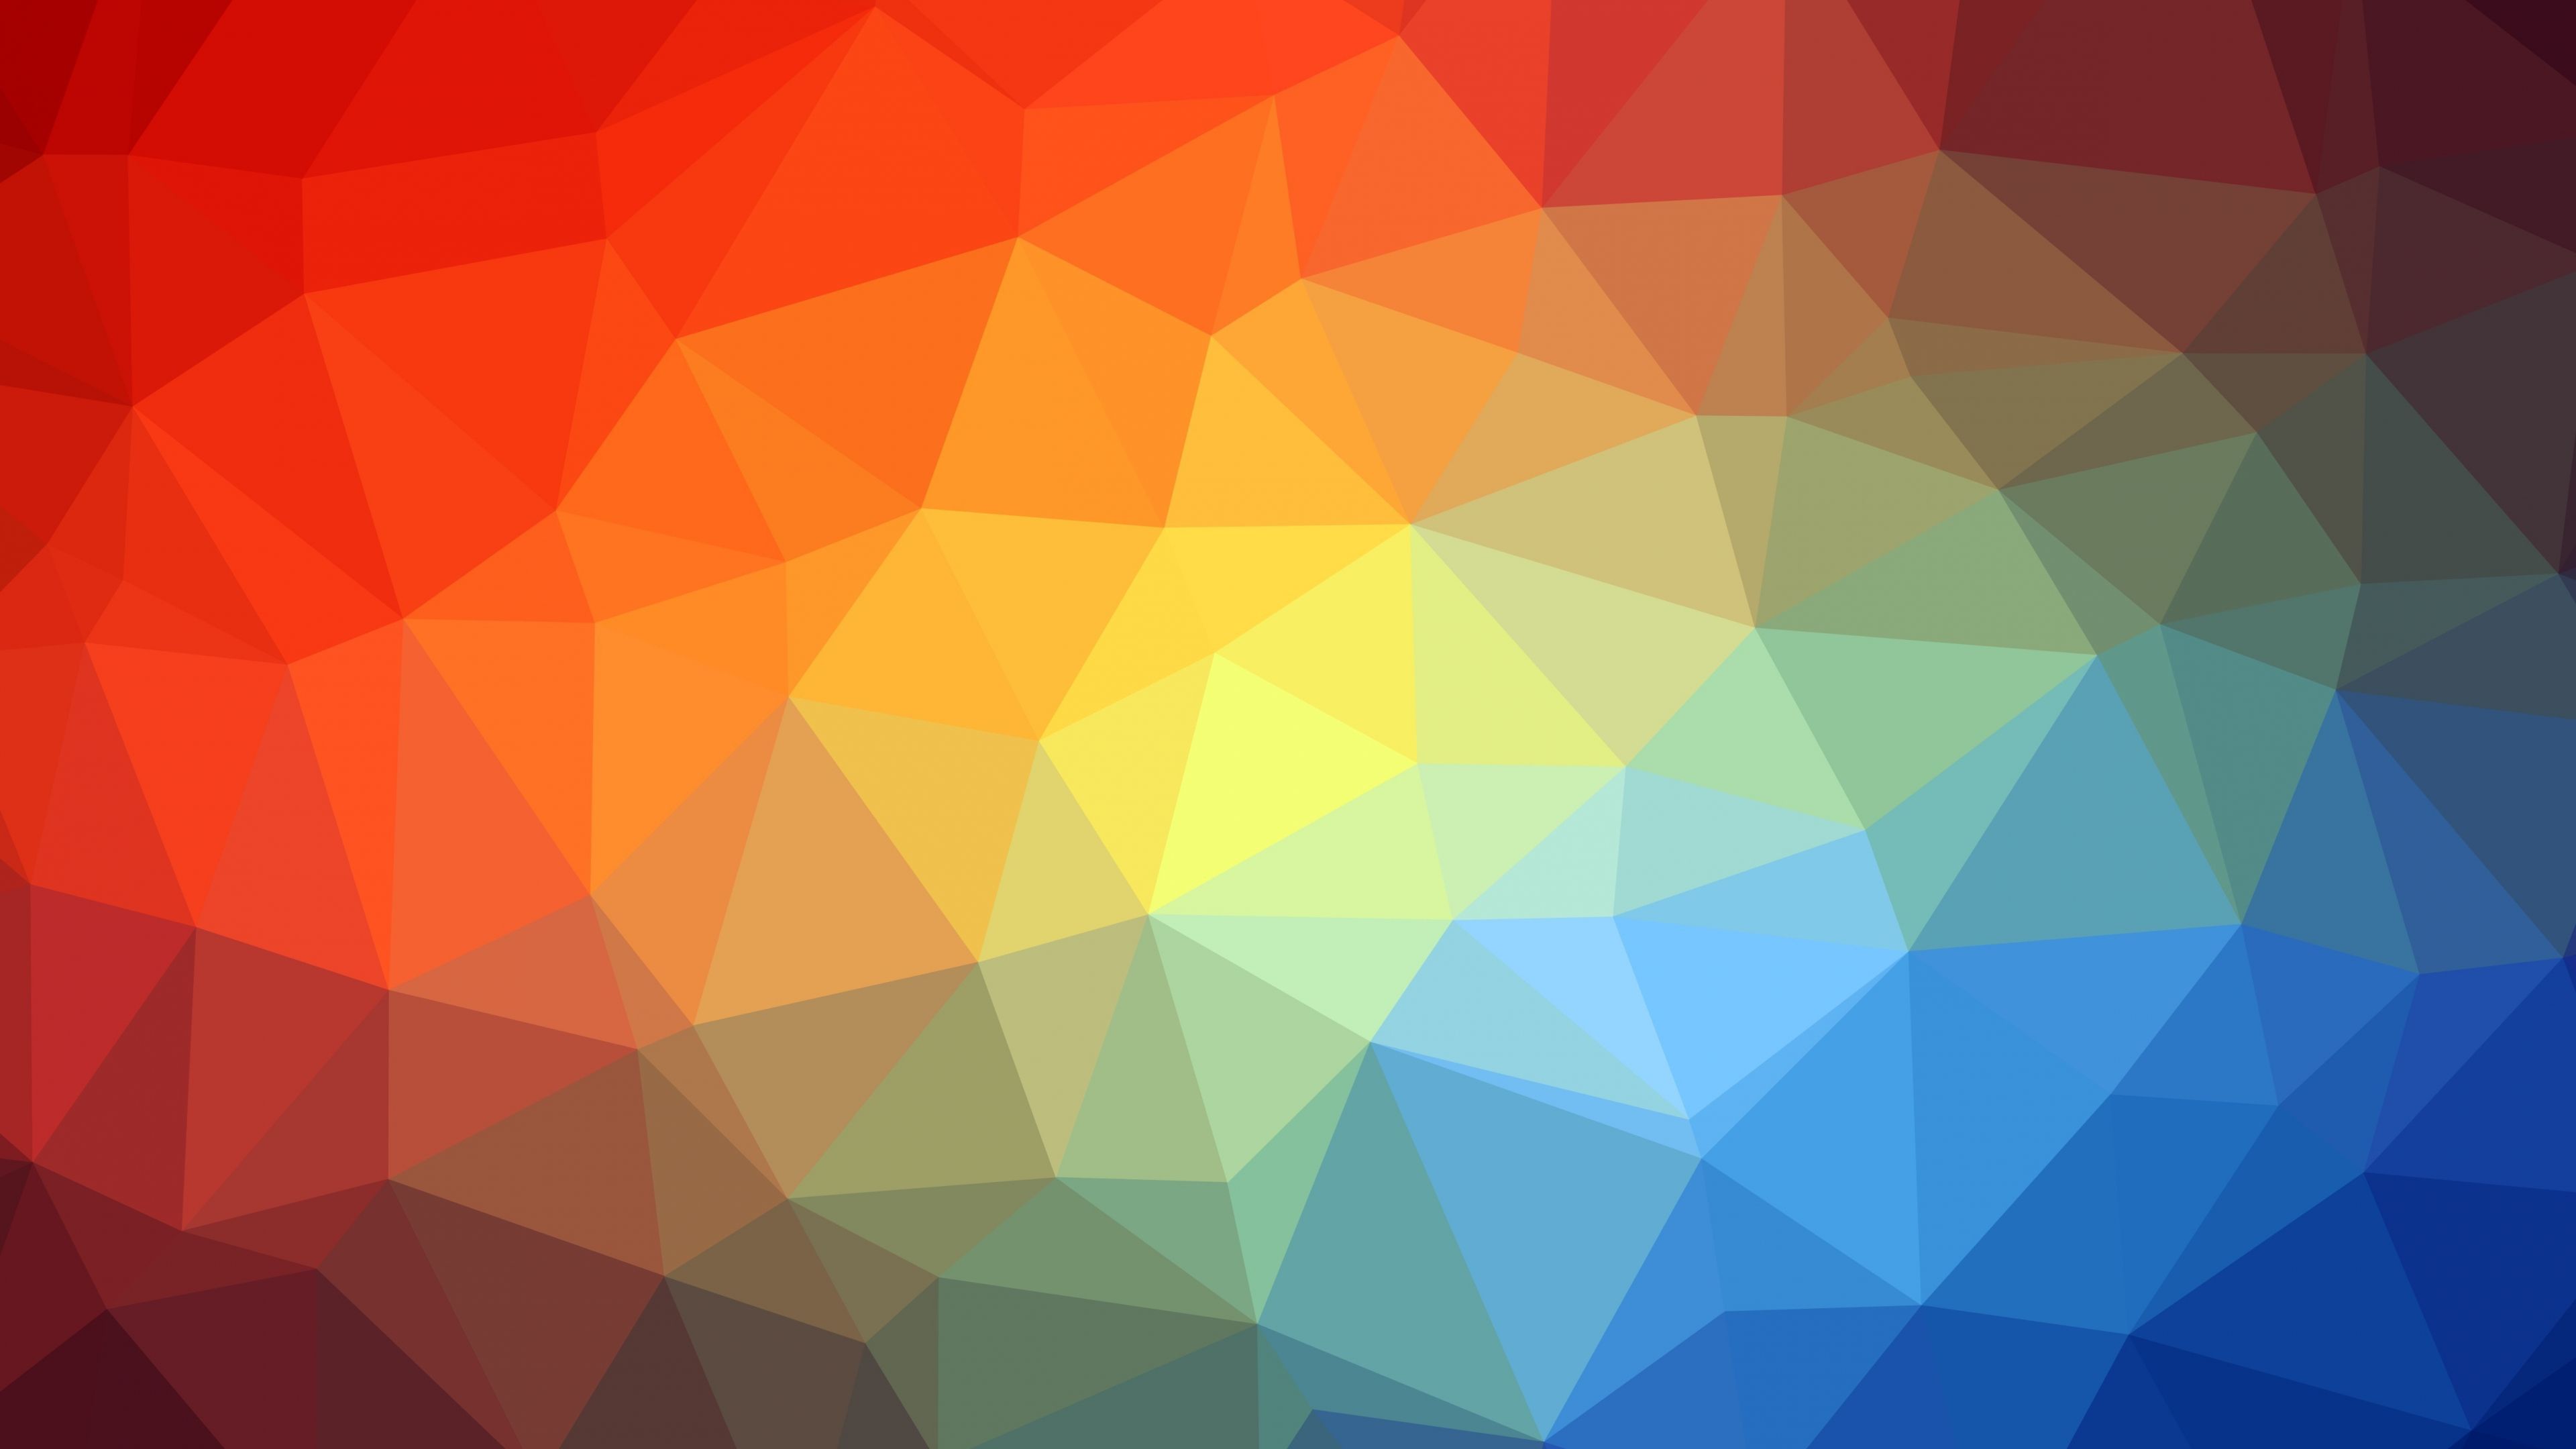 Download 3840x2160 wallpaper triangles, colorful, abstract, geometrical, 4k, uhd 16: widescreen, 3840x2160 HD image, background, 1888